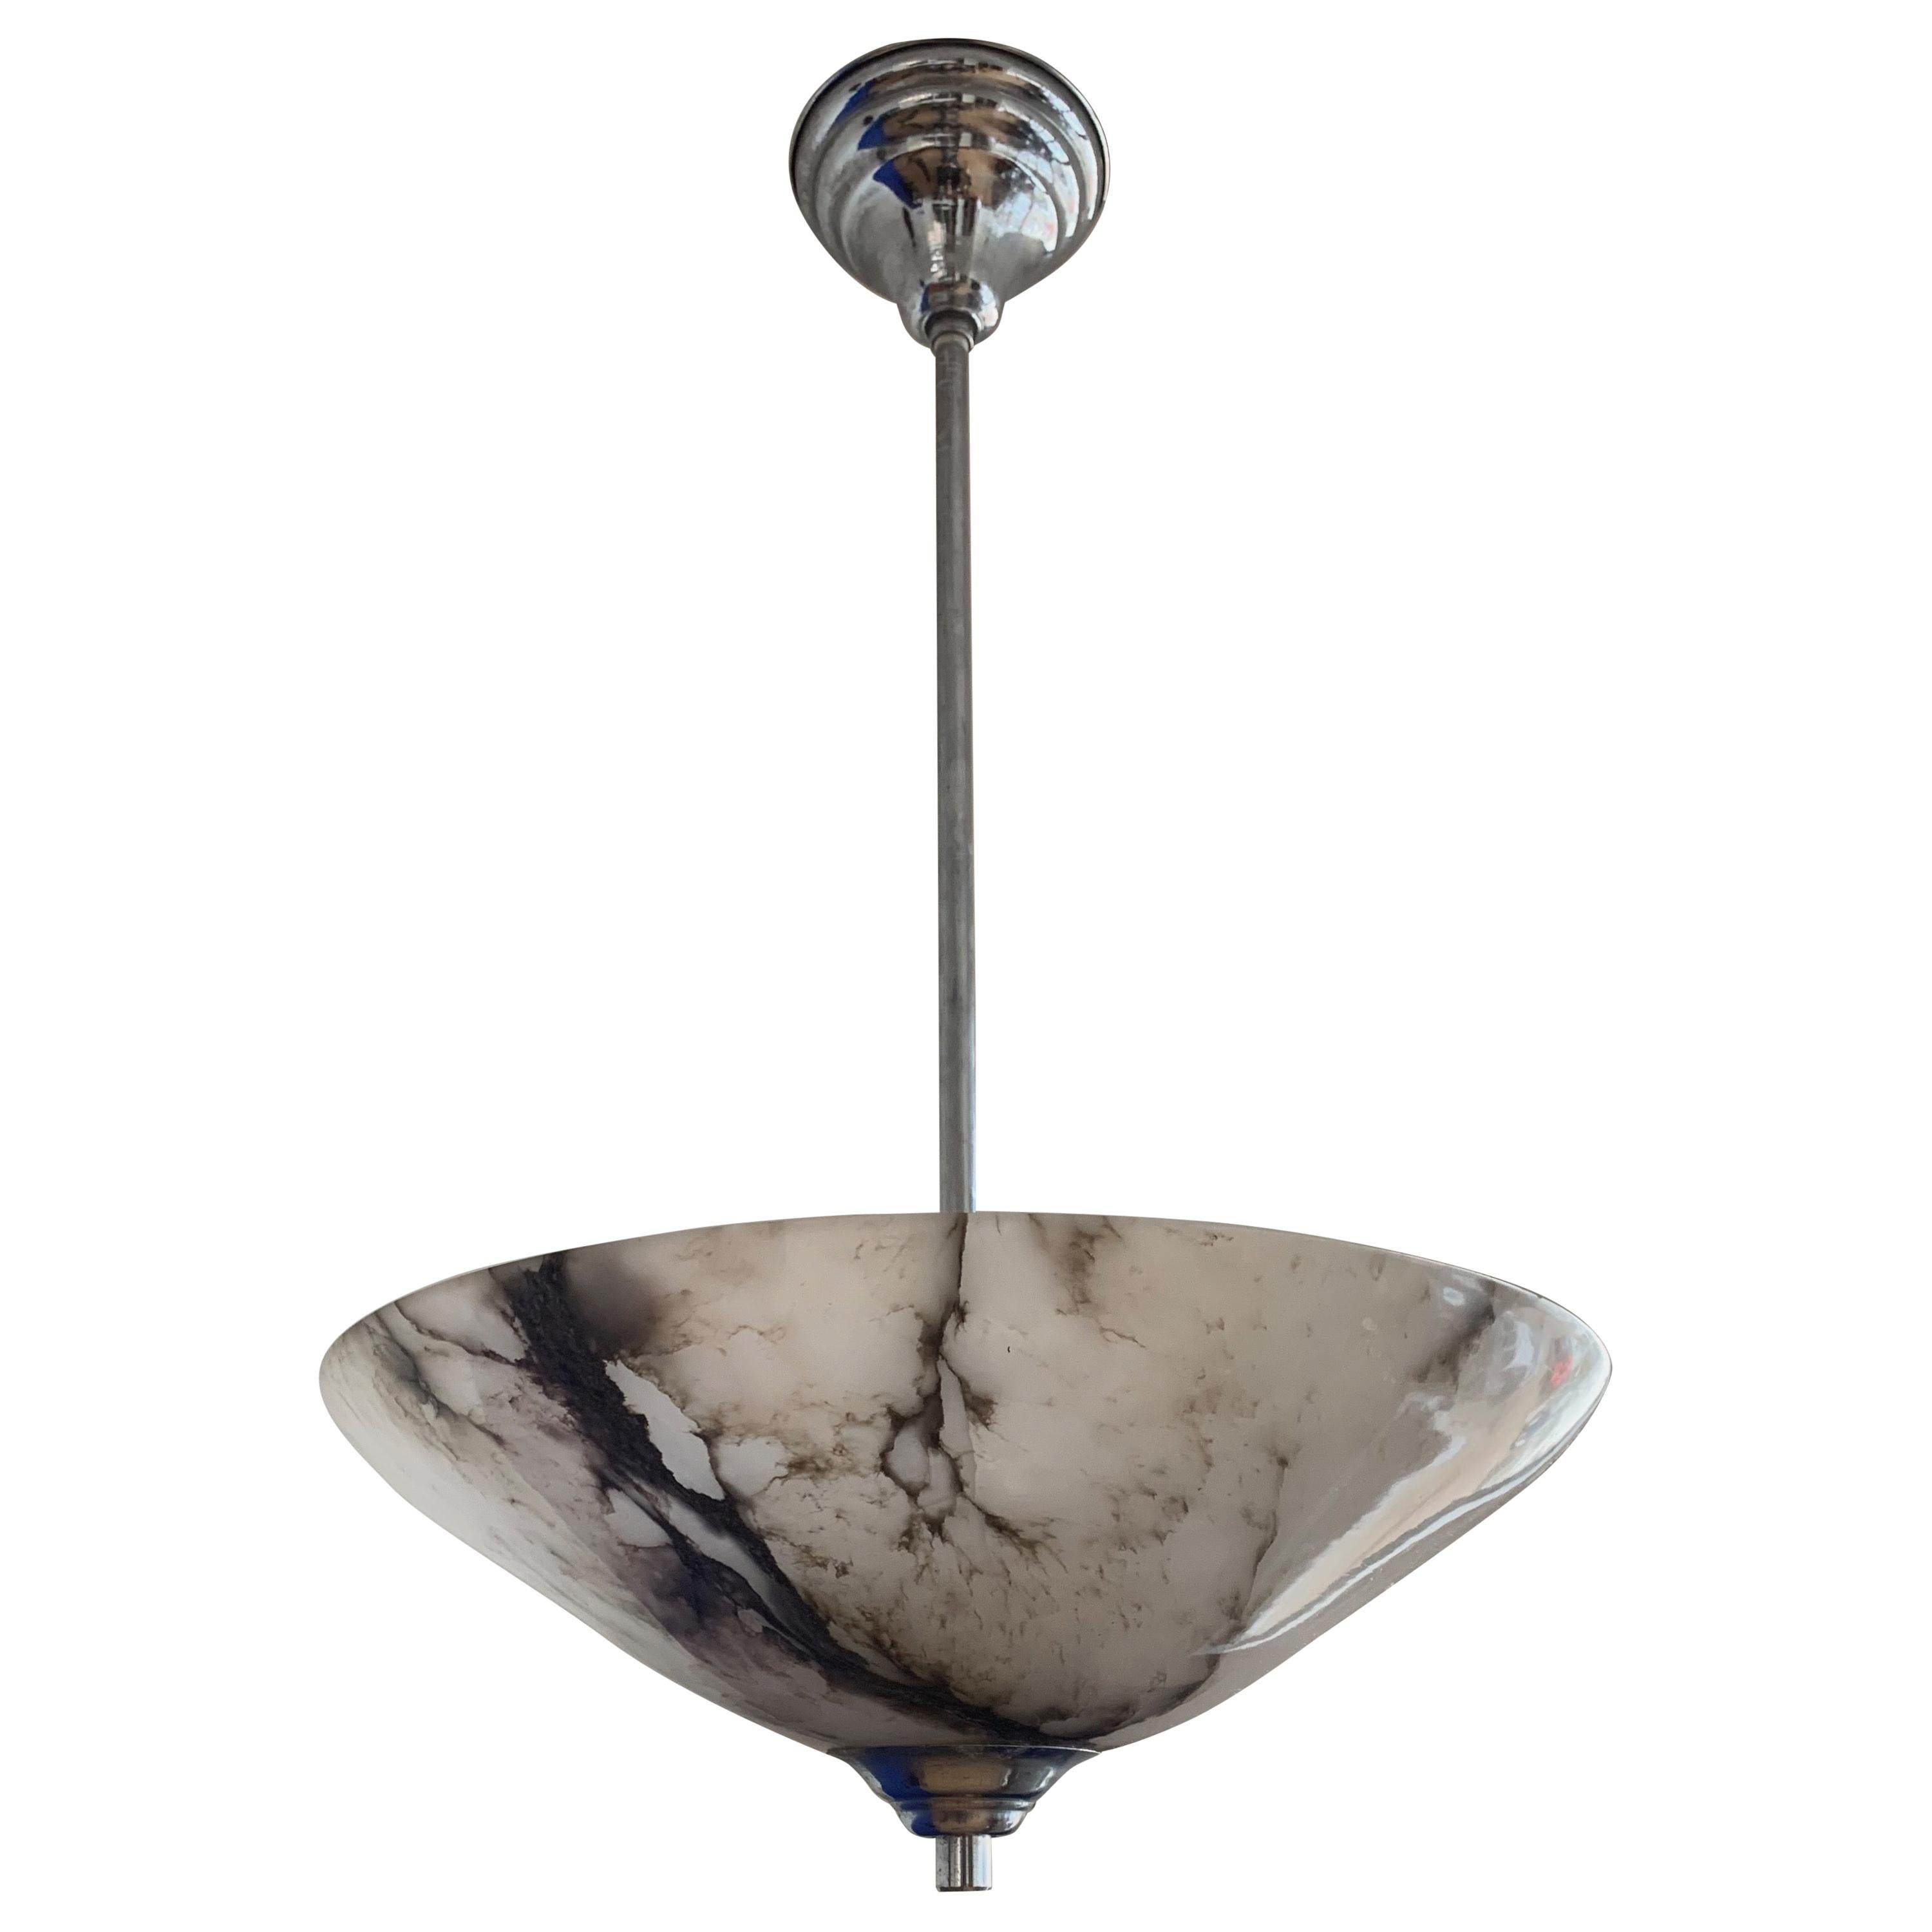 Timeless ceiling fixture from the European Art Deco era.

This wonderfully stylish and good size Art Deco light fixture comes with a stunning and superbly polished alabaster shade. What makes this antique shade extra spectacular is the combination